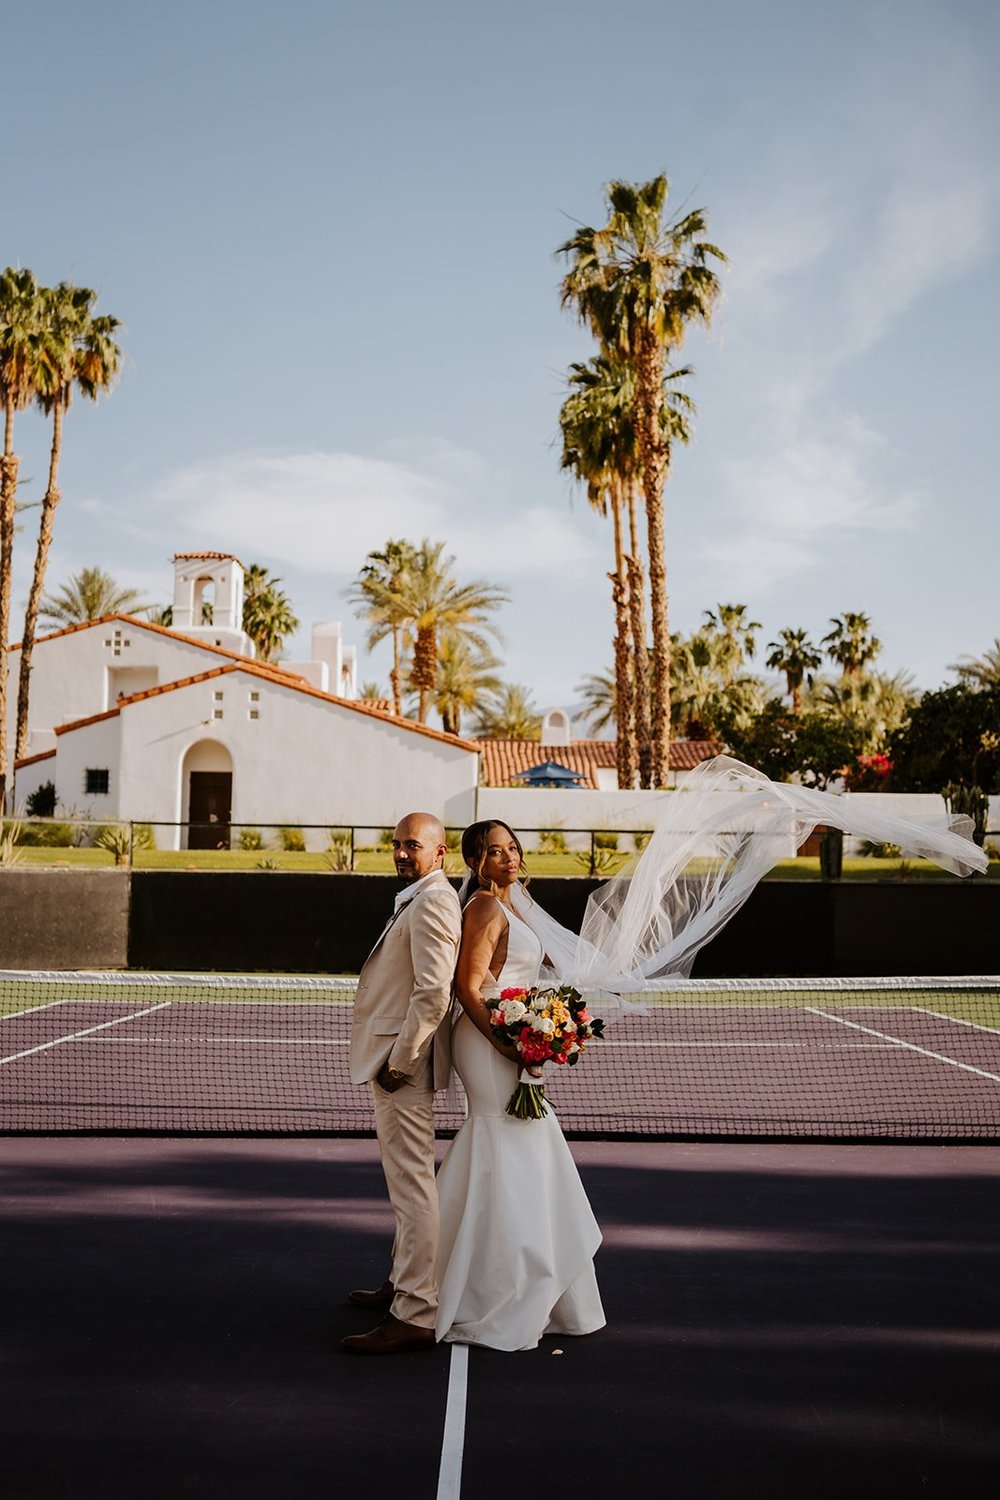 Bride and groom photos at the tennis courts at La Quinta Resort in Palm Springs | photo by Tida Svy